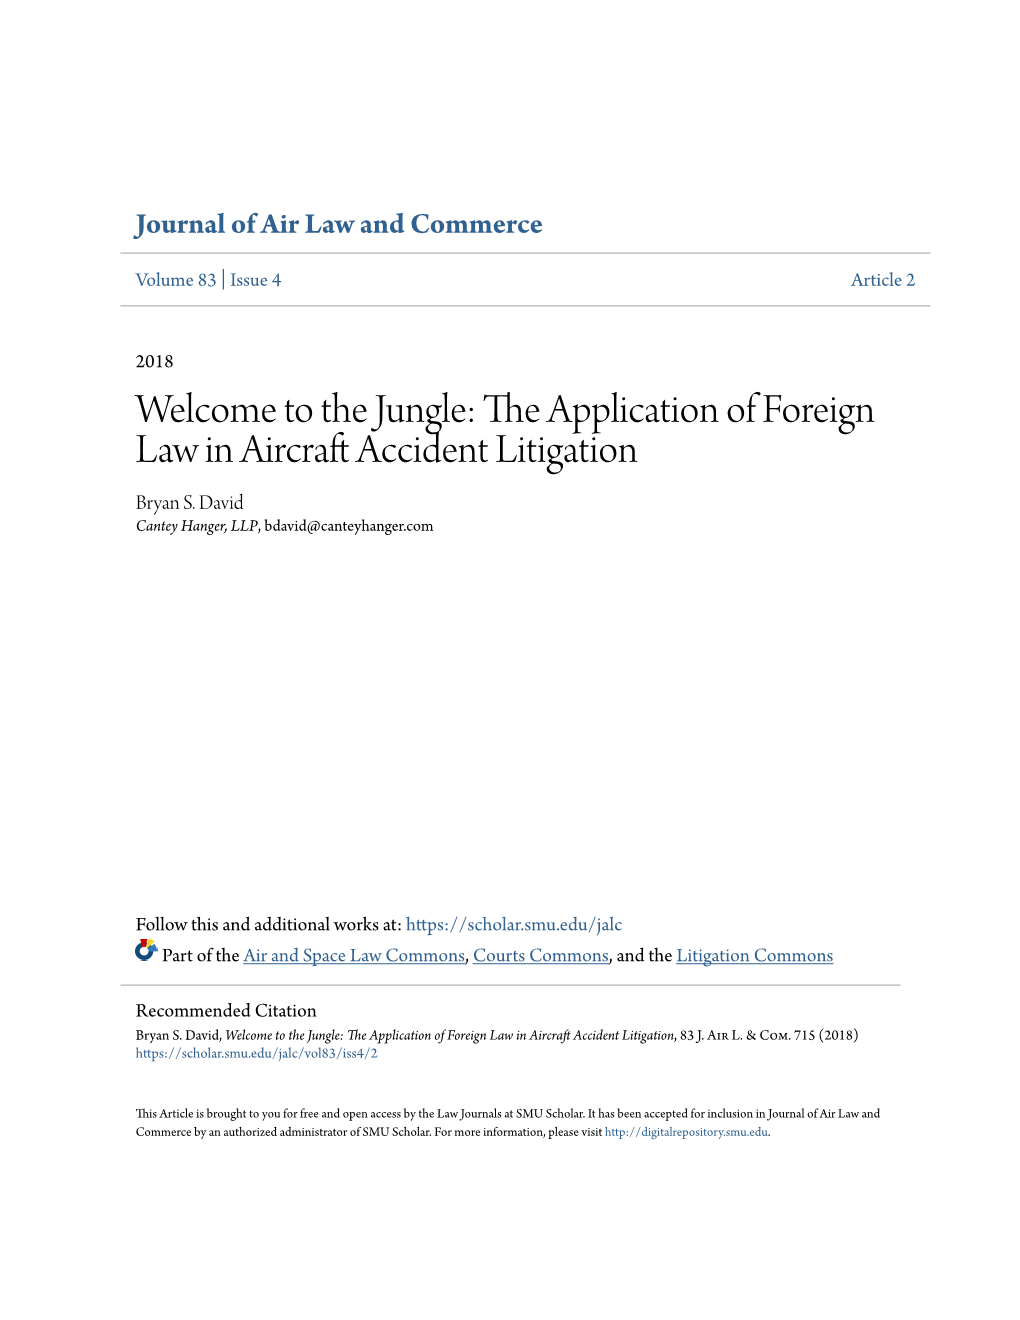 The Application of Foreign Law in Aircraft Accident Litigation Bryan S